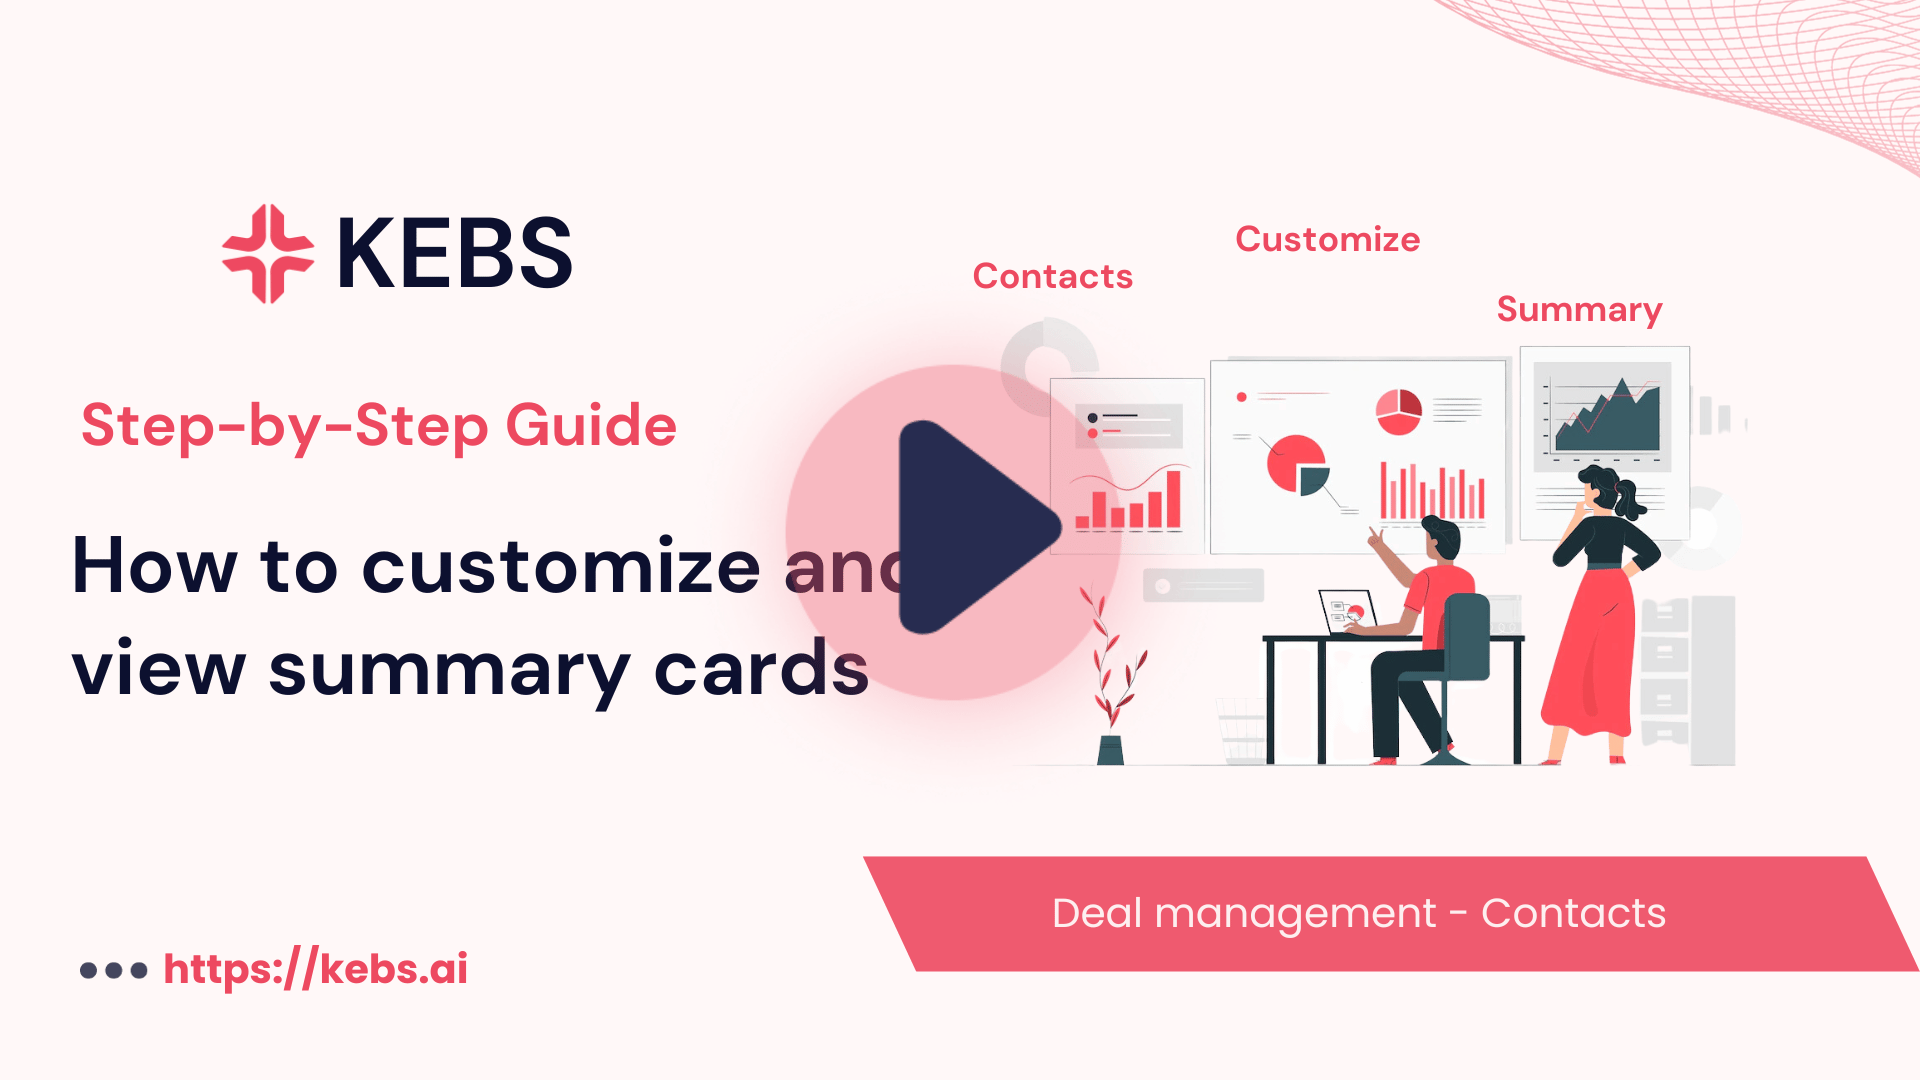 How to customize and view summary cards